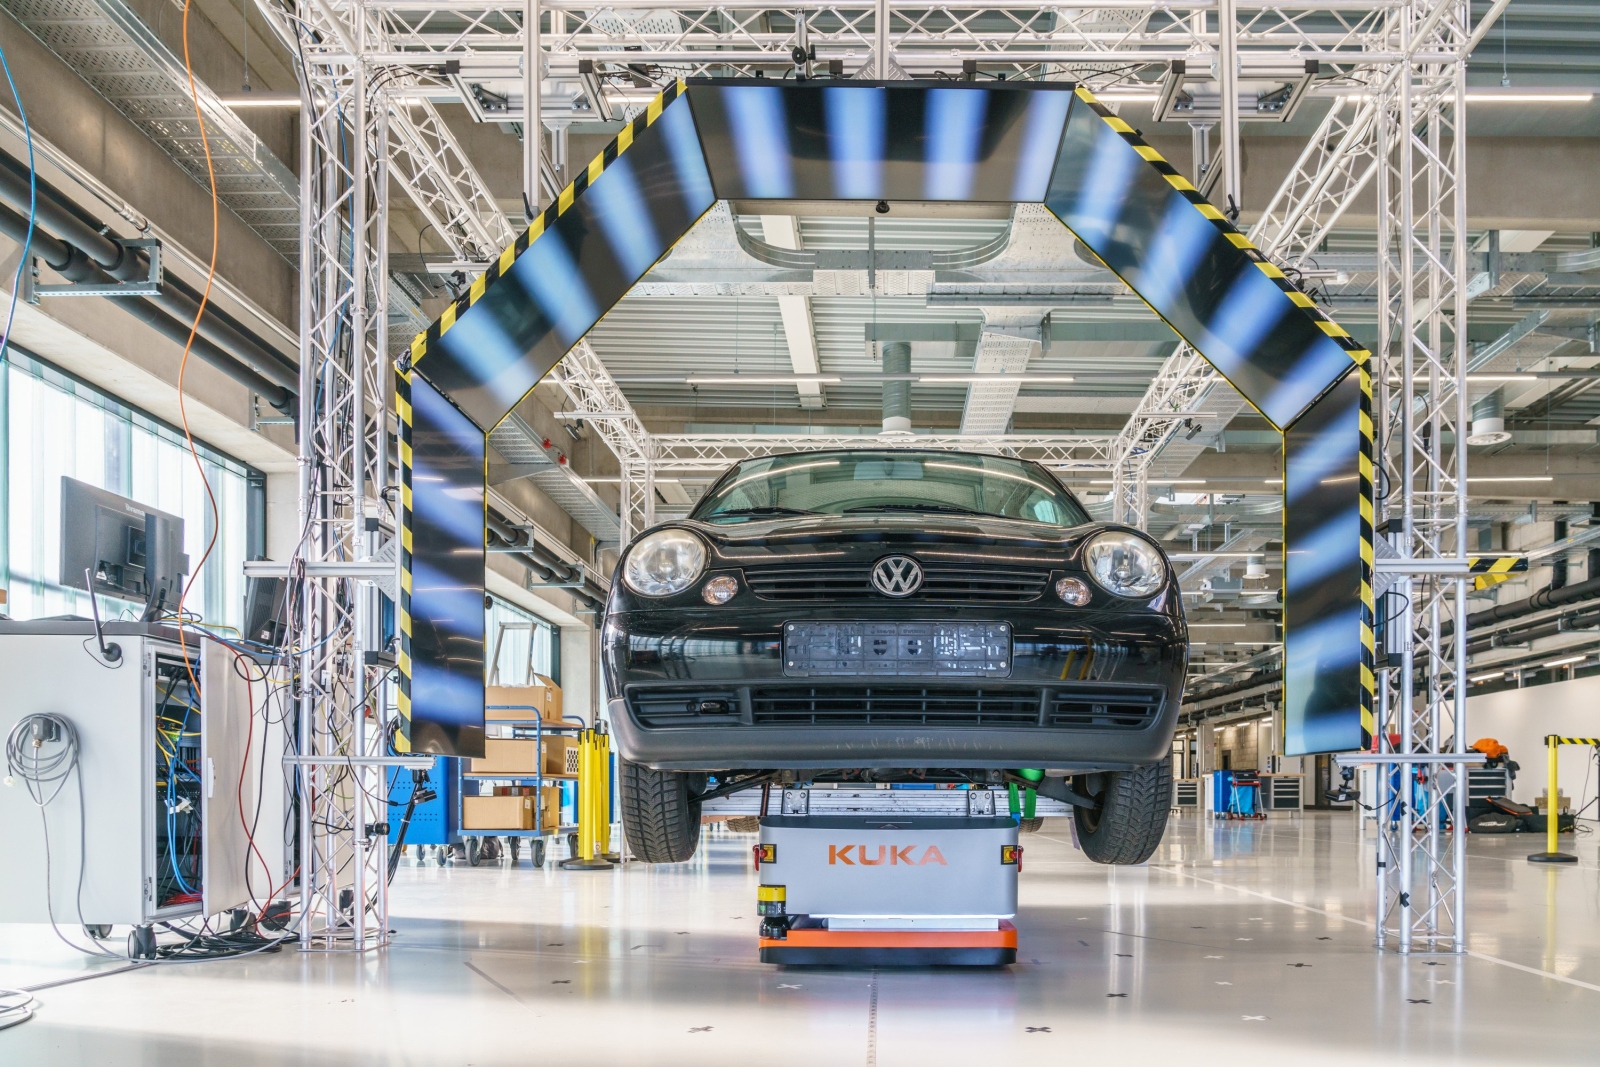 In the AutoInspect demonstrator, the car body is transported to the inspection stations on a conveyor system. The picture shows the deflectometry portal: The software can detect surface defects based on the reflection of the striped patterns displayed on the monitors.